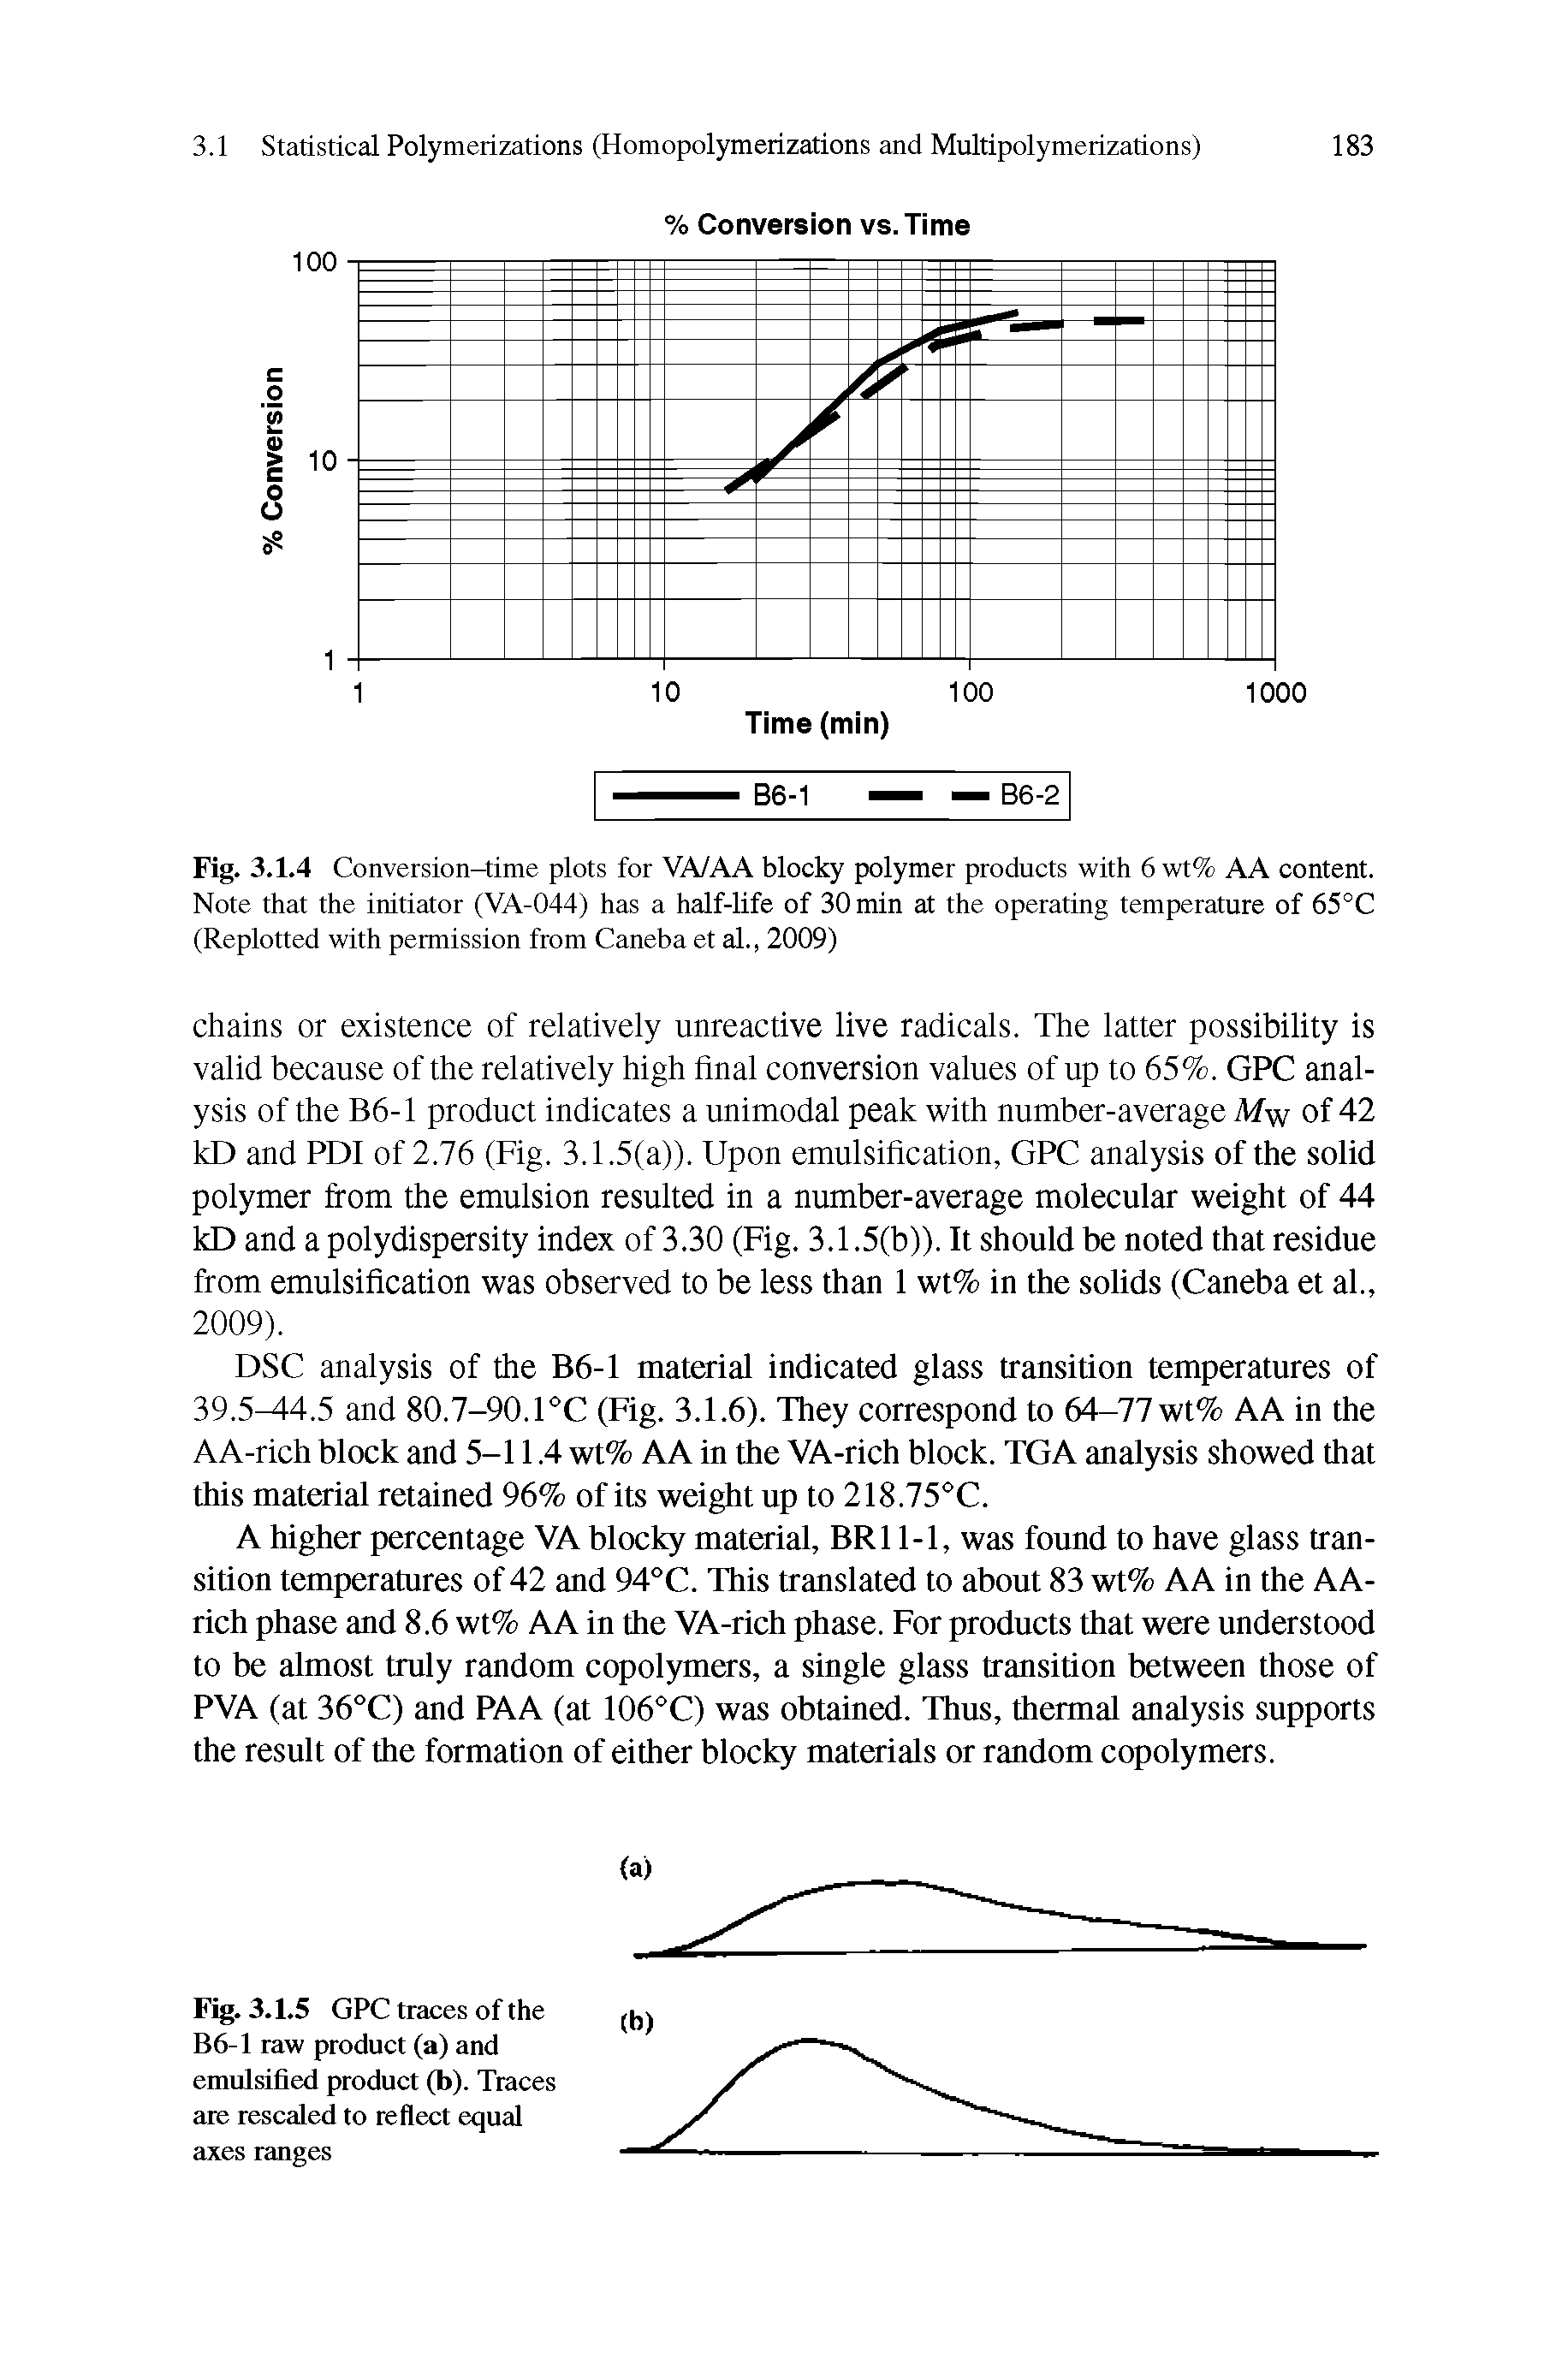 Fig. 3.1.5 GPC traces of the B6-1 raw product (a) and emulsified product (b). Traces are rescaled to reflect equal axes ranges...